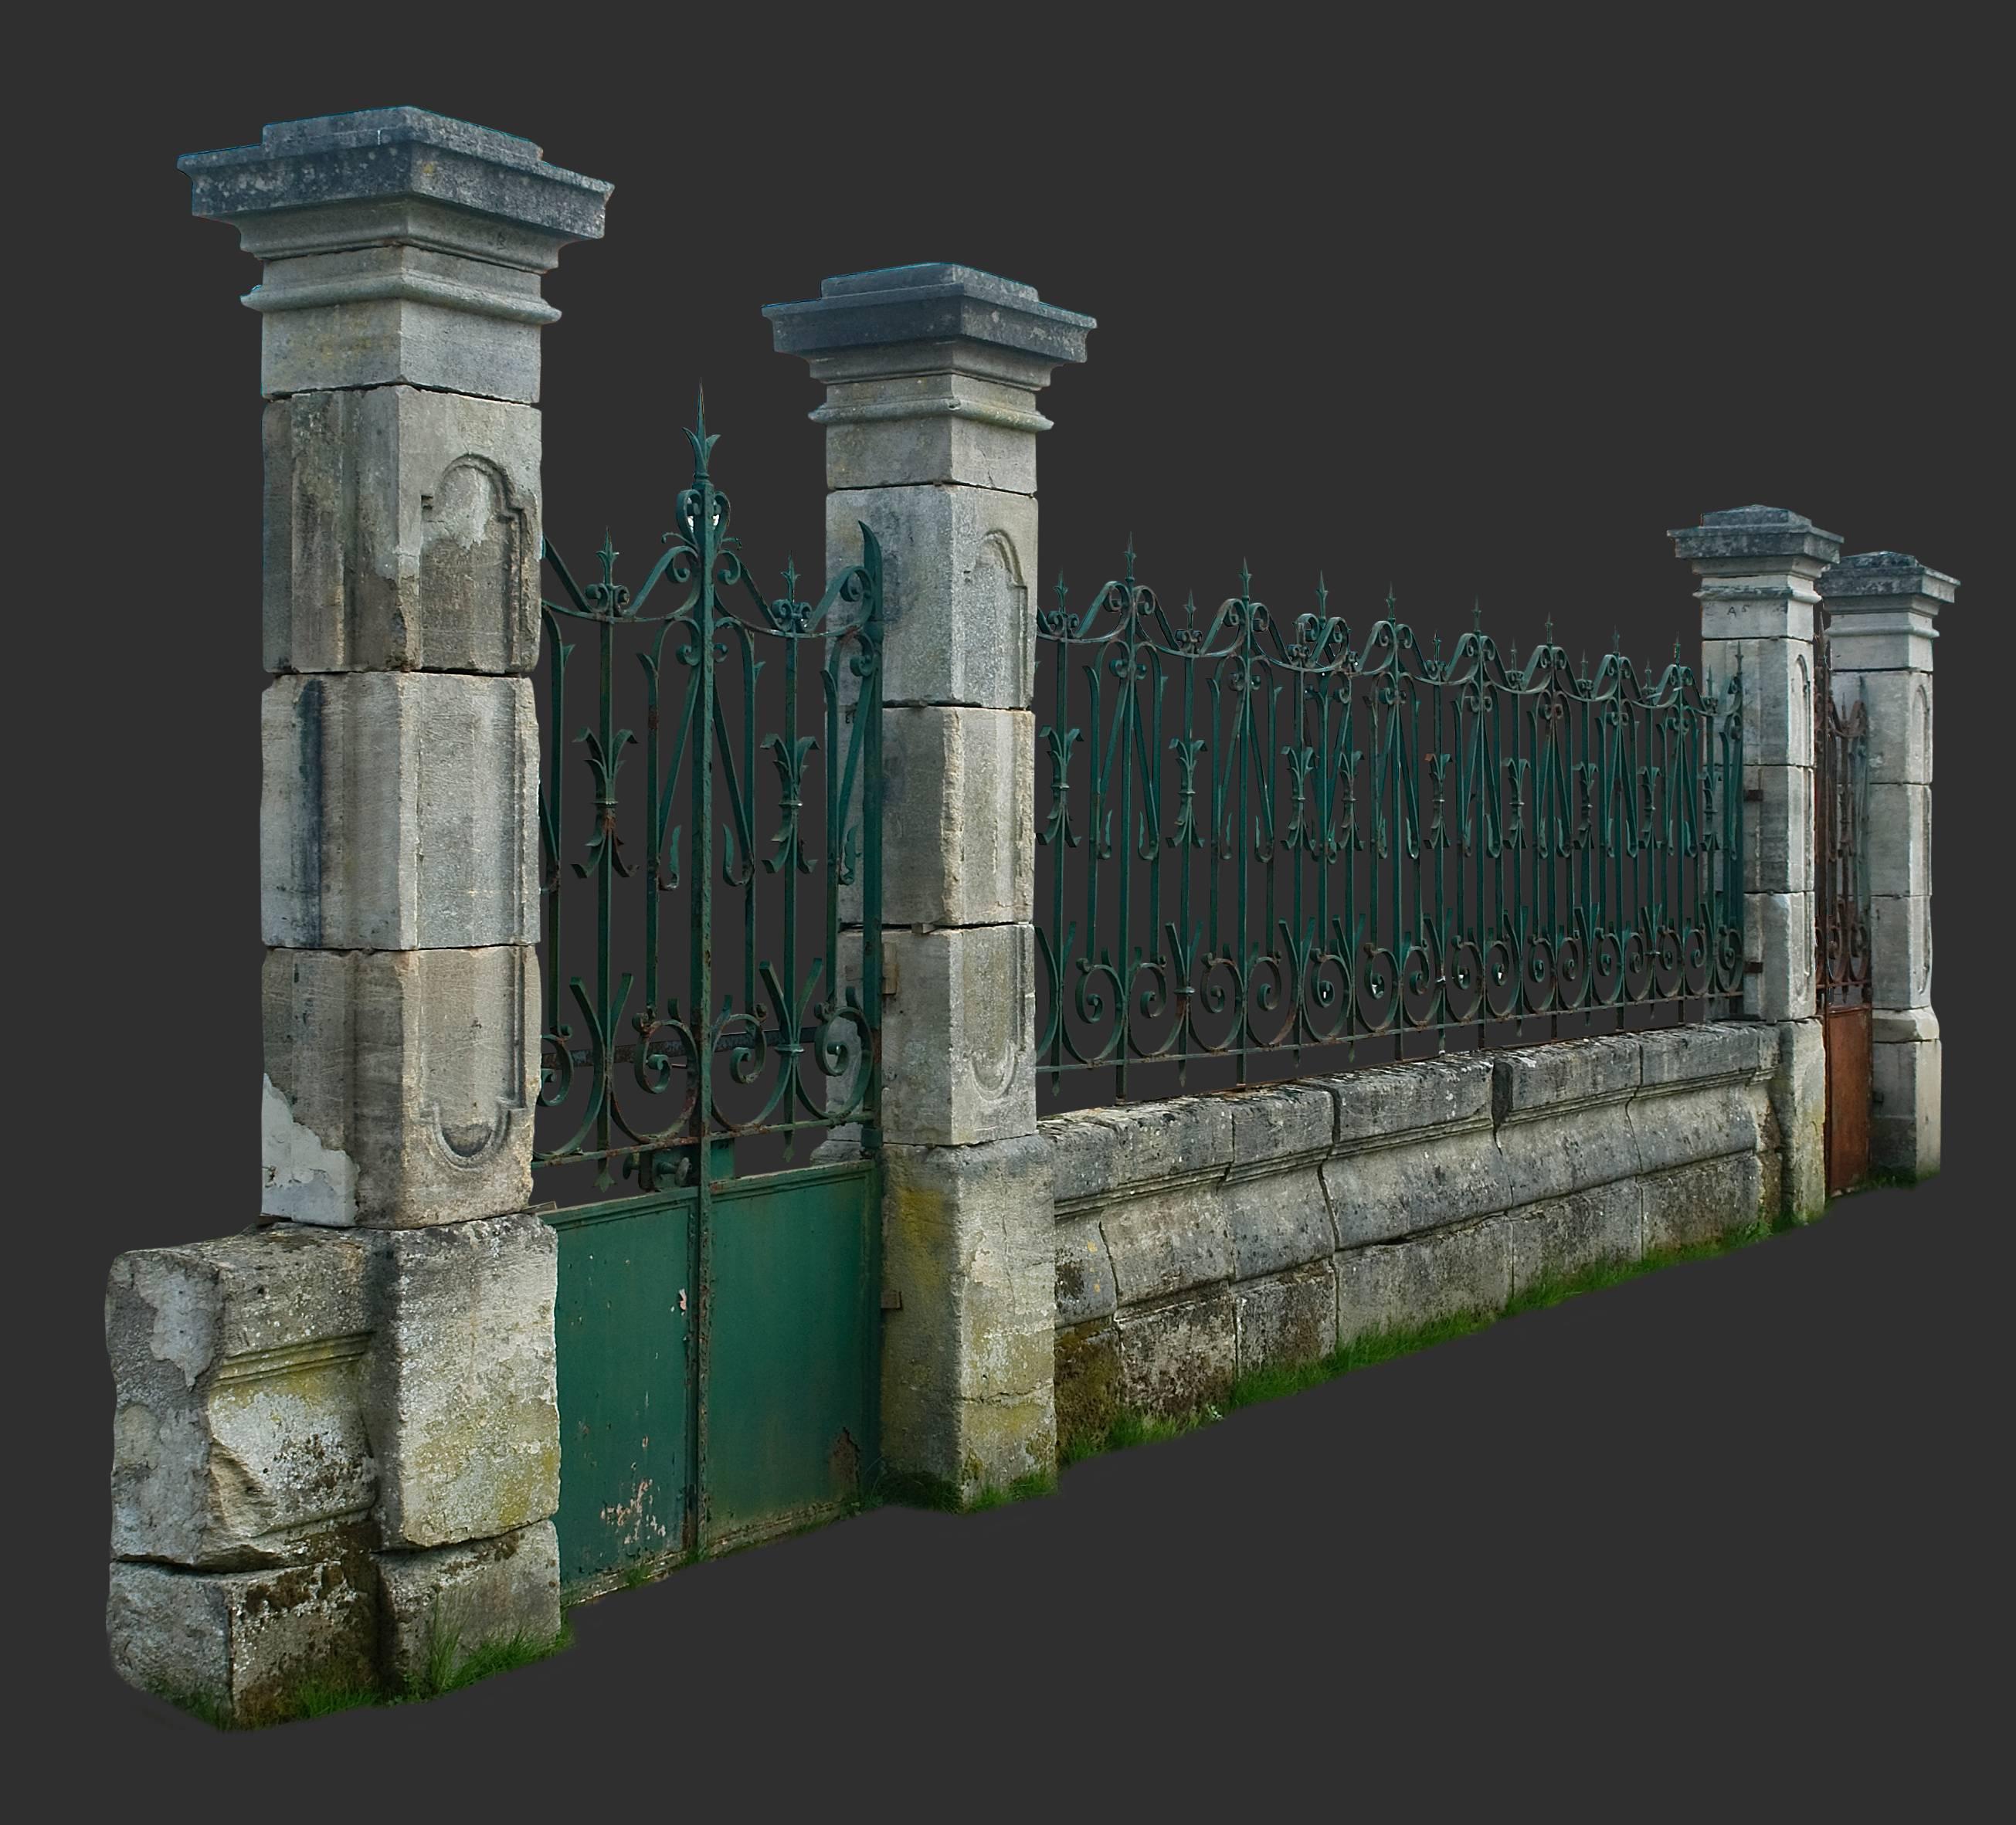 These early 18th century French gateways are completely hand-carved from massive blocks of sandstone. Their moldings and symmetric design are typical for the Louis XIV style. Originally they were part of the fencework around a country mansion in the